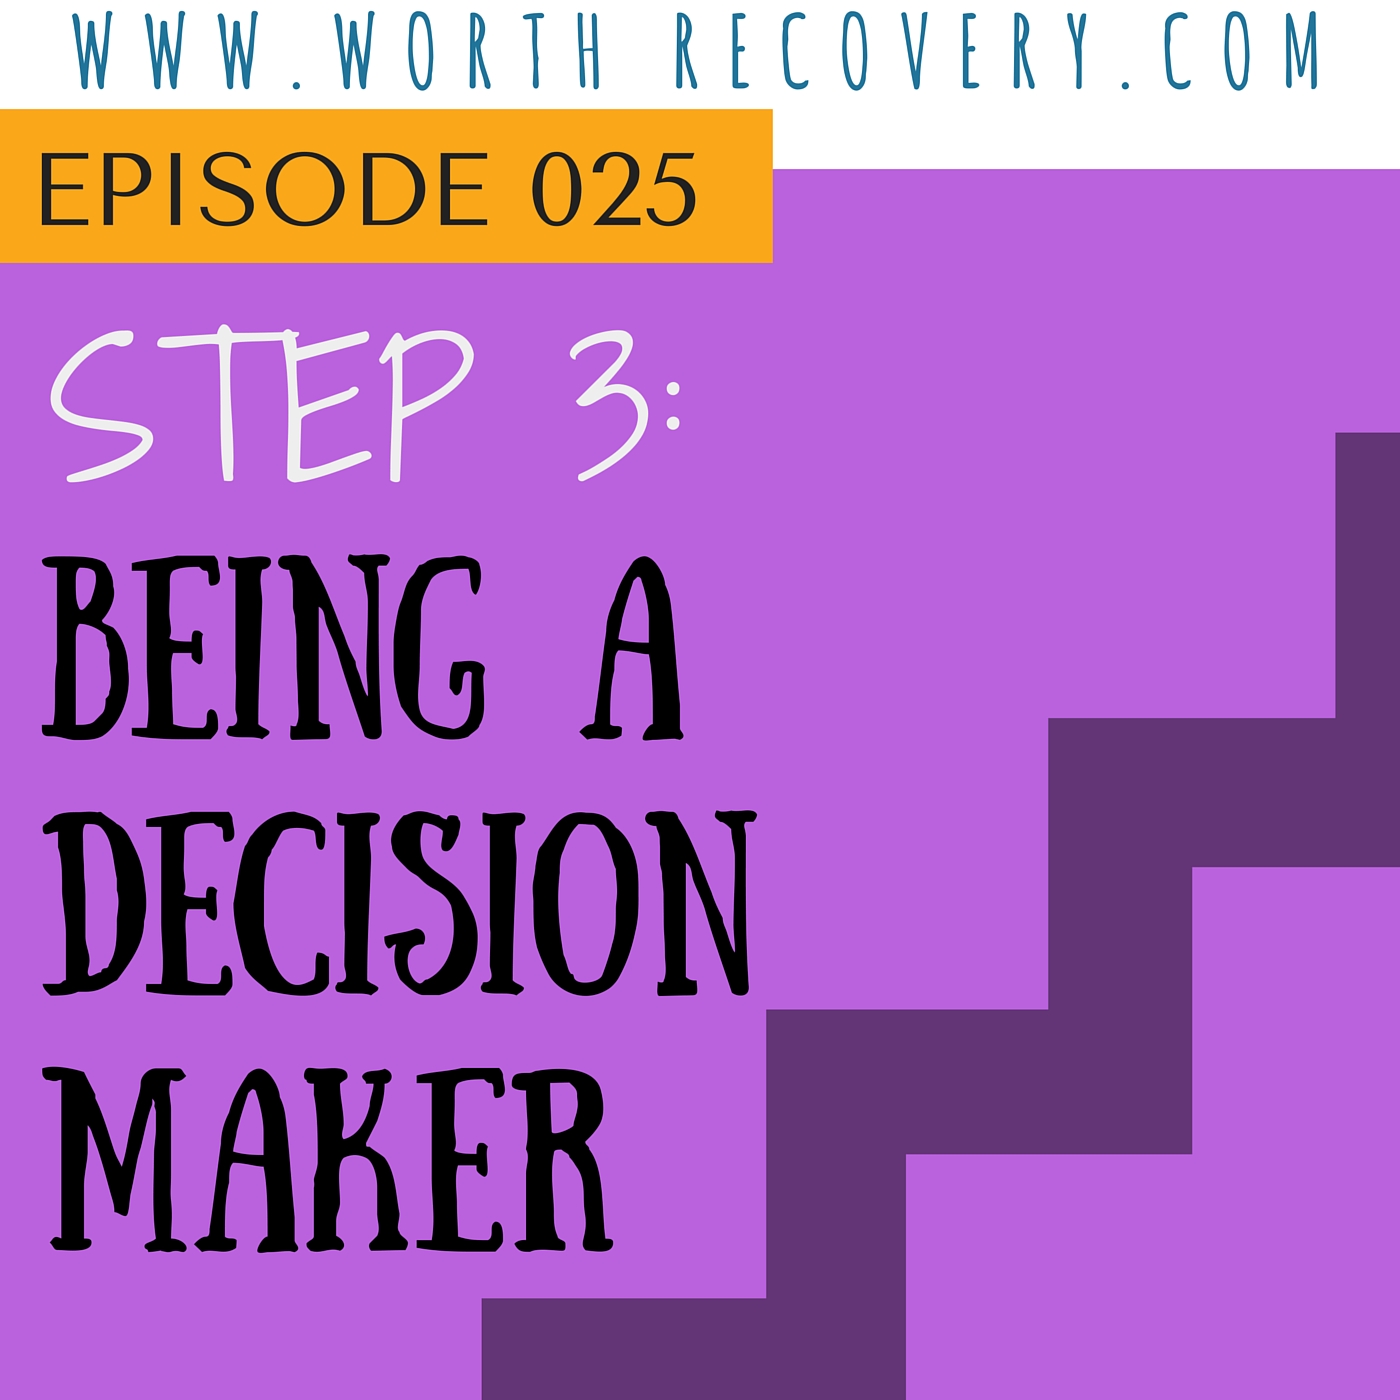 Episode 025: Step 3: Being a Decision Maker